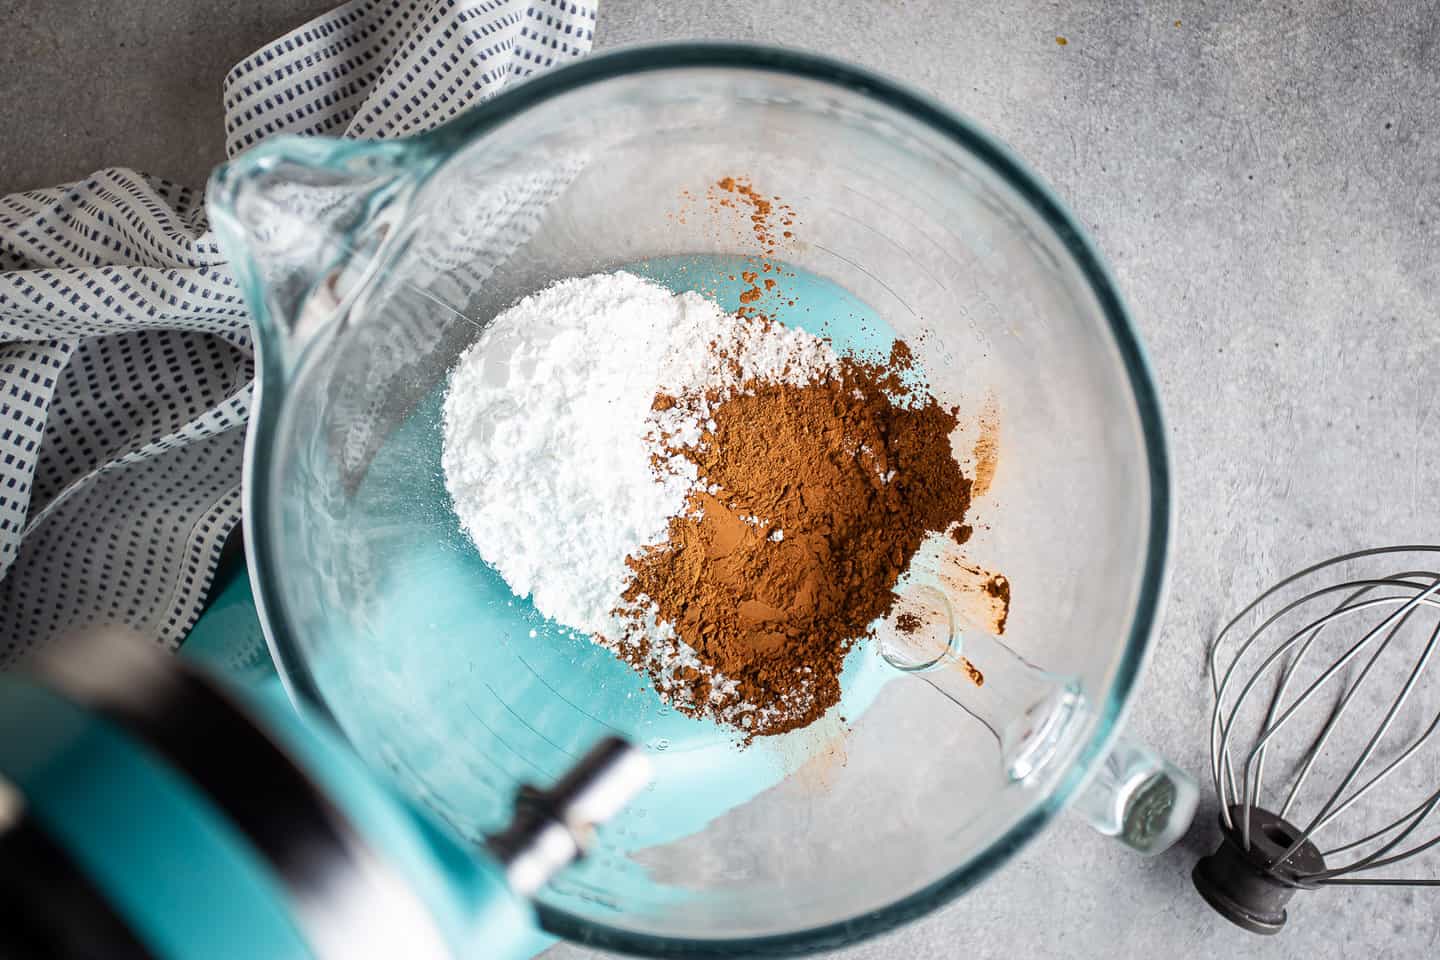 Powdered sugar and cocoa powder in the bowl of a stand mixer.